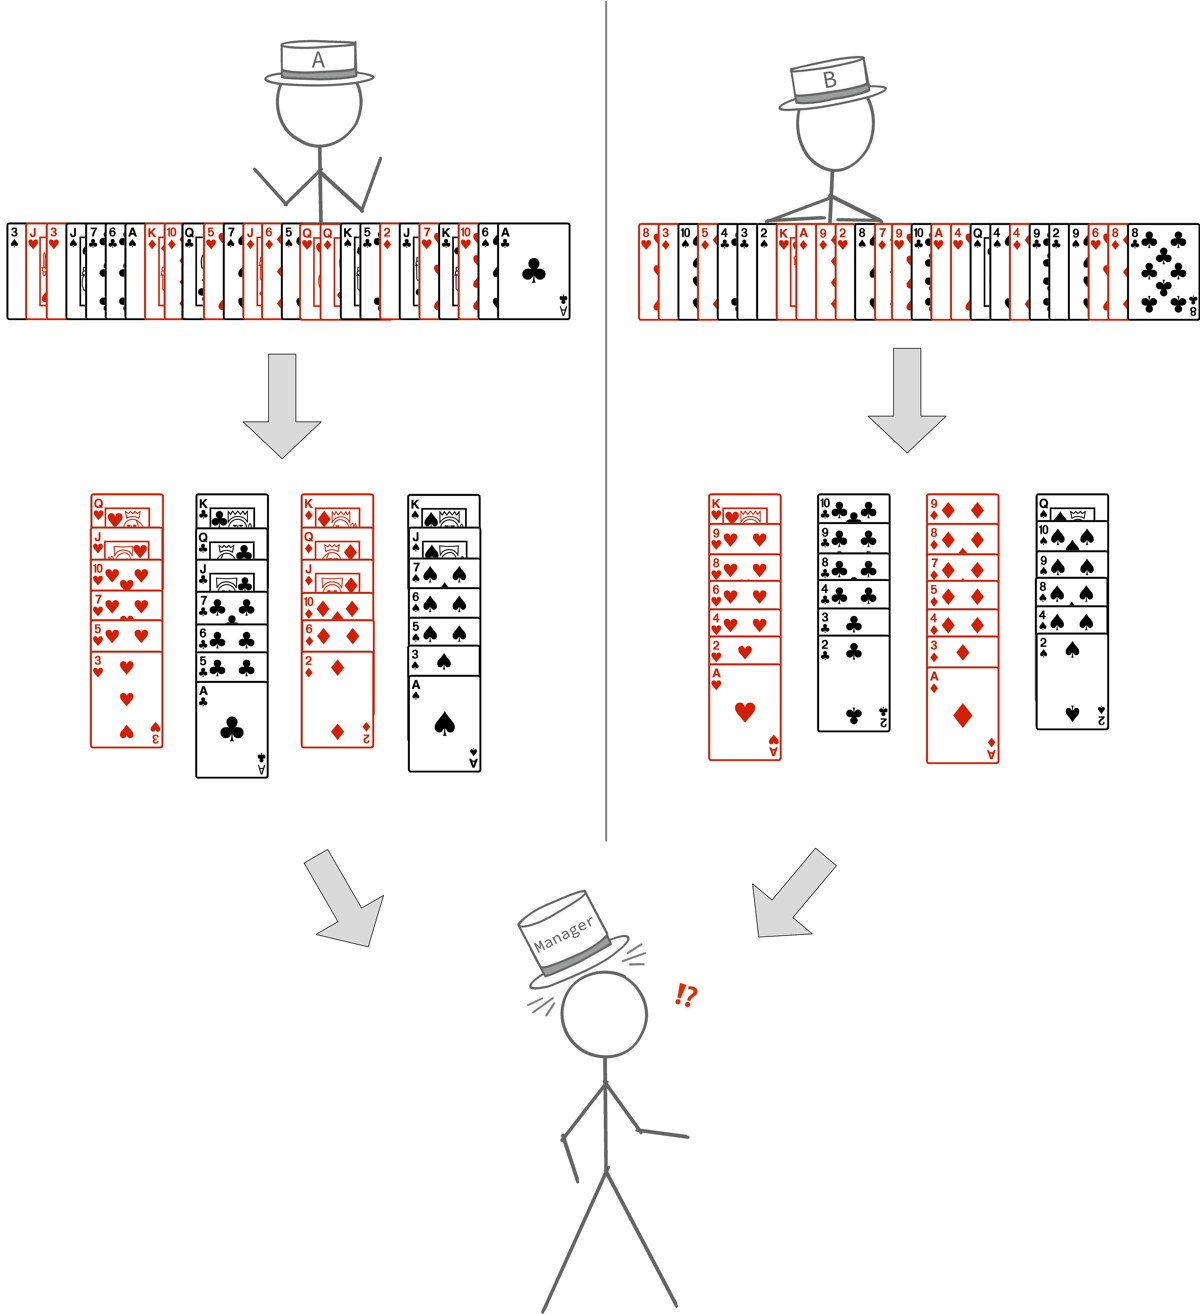 The unsorted deck is randomly divided between two workers. Each worker produces sorted output but the manager must merge these sorted outputs into a final result.